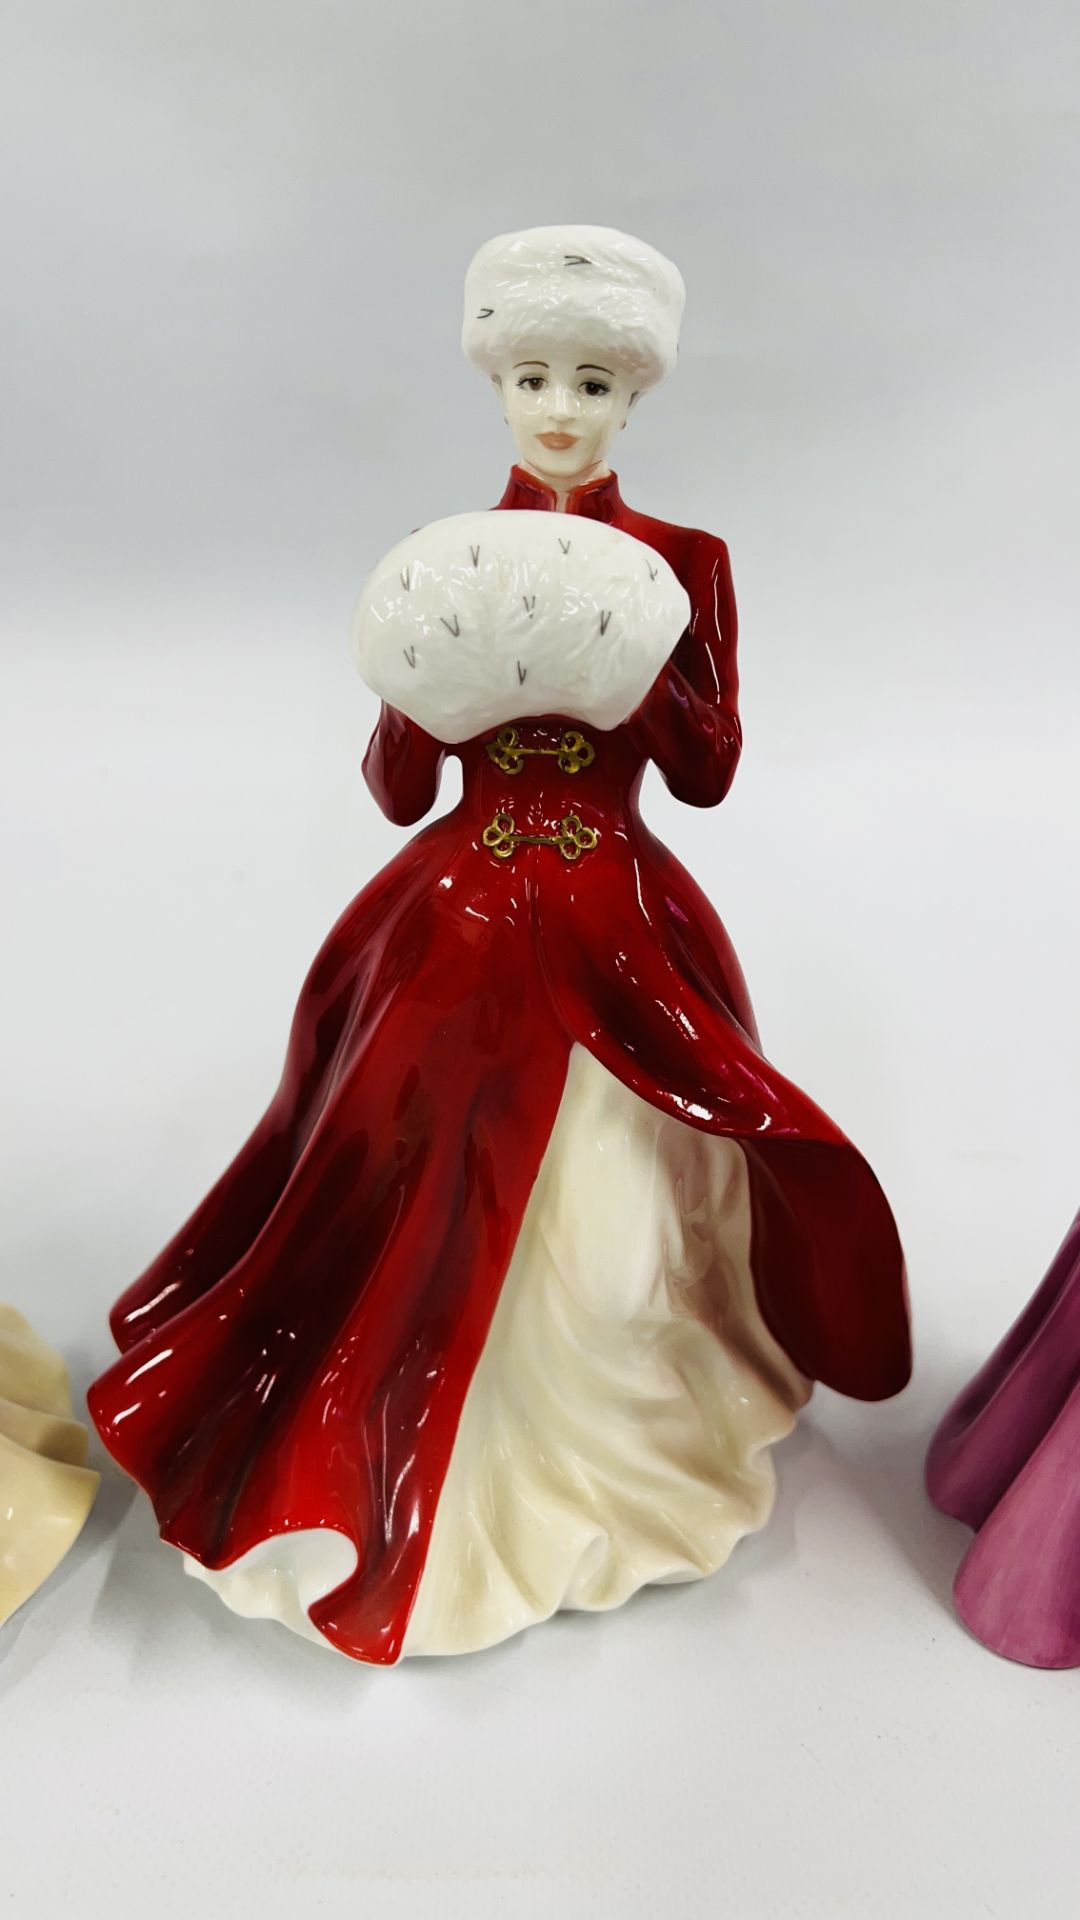 3 ROYAL DOULTON CABINET COLLECTORS FIGURINES TO INCLUDE "NATALIE" HN 5012, LIMITED EDITION 1419/15, - Image 3 of 10